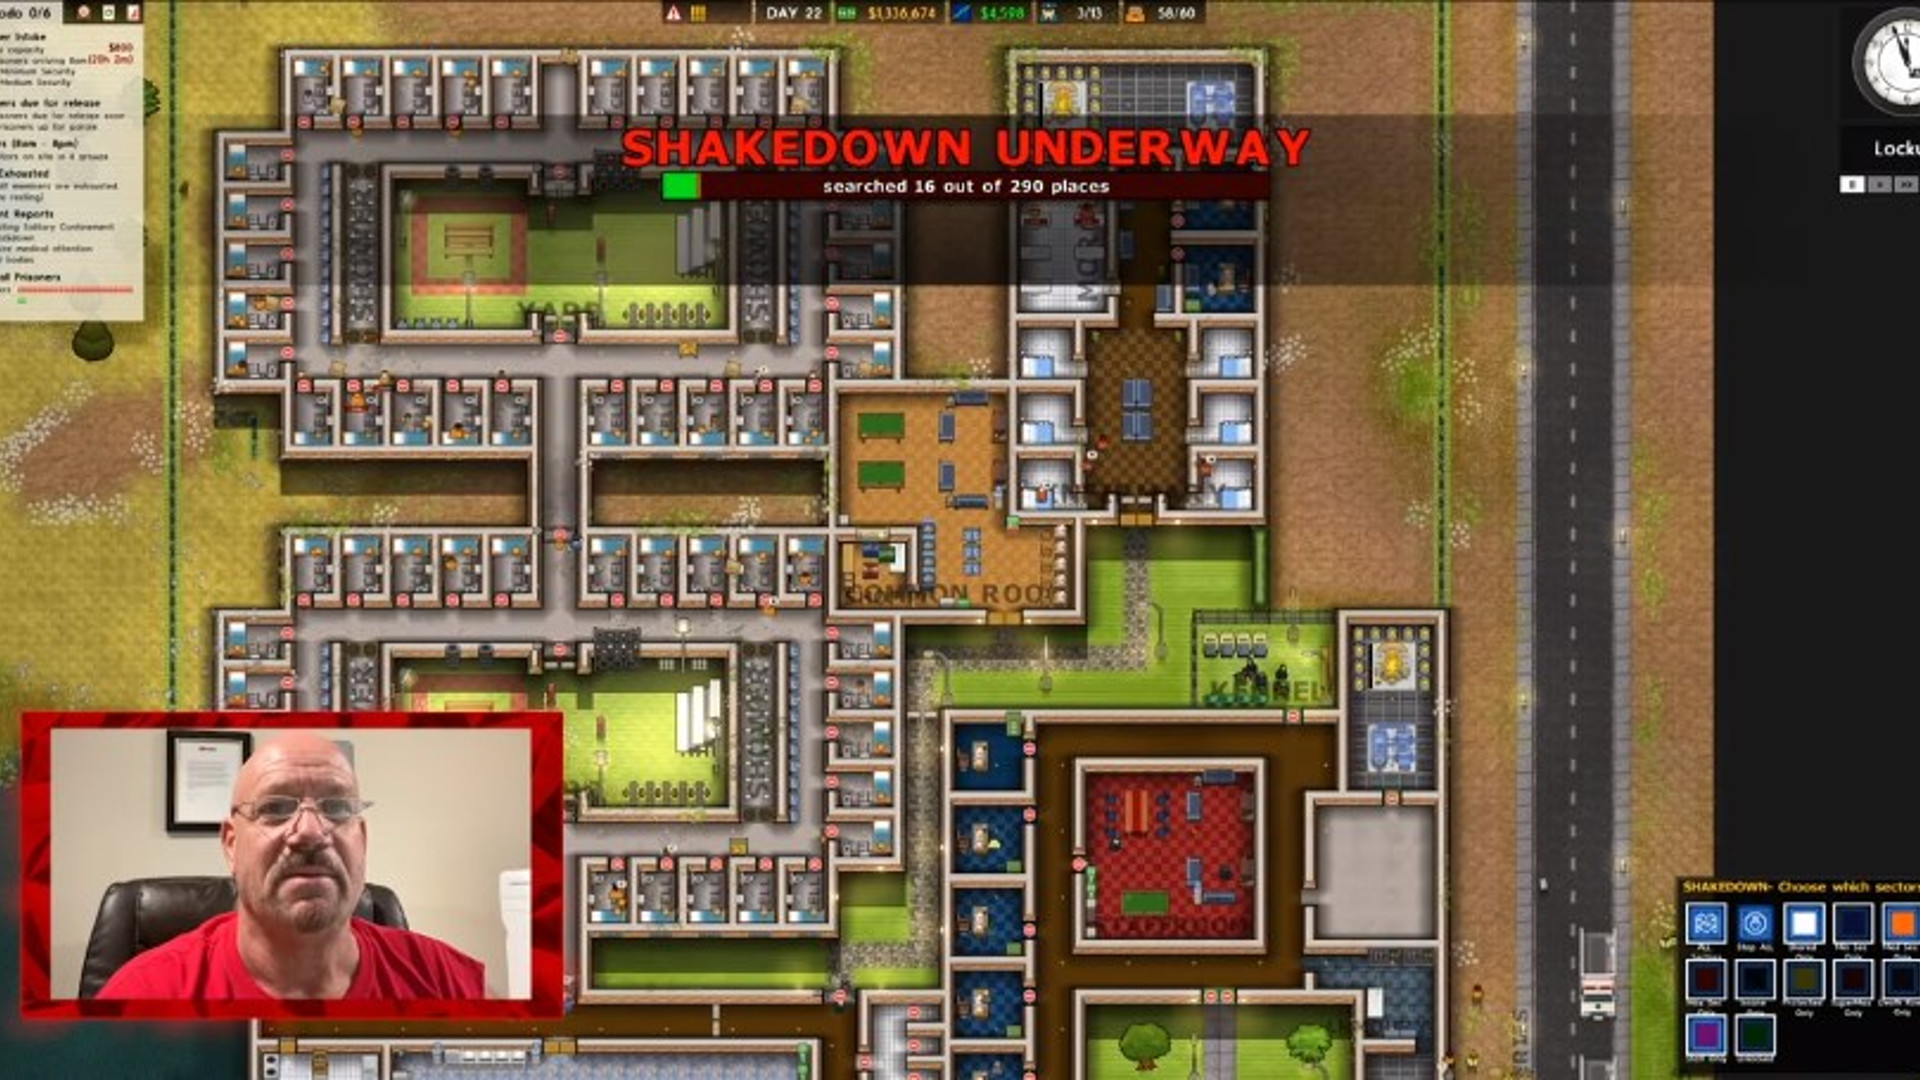 8. "Prison Architect" fan art: Inmate with blue hair - wide 1